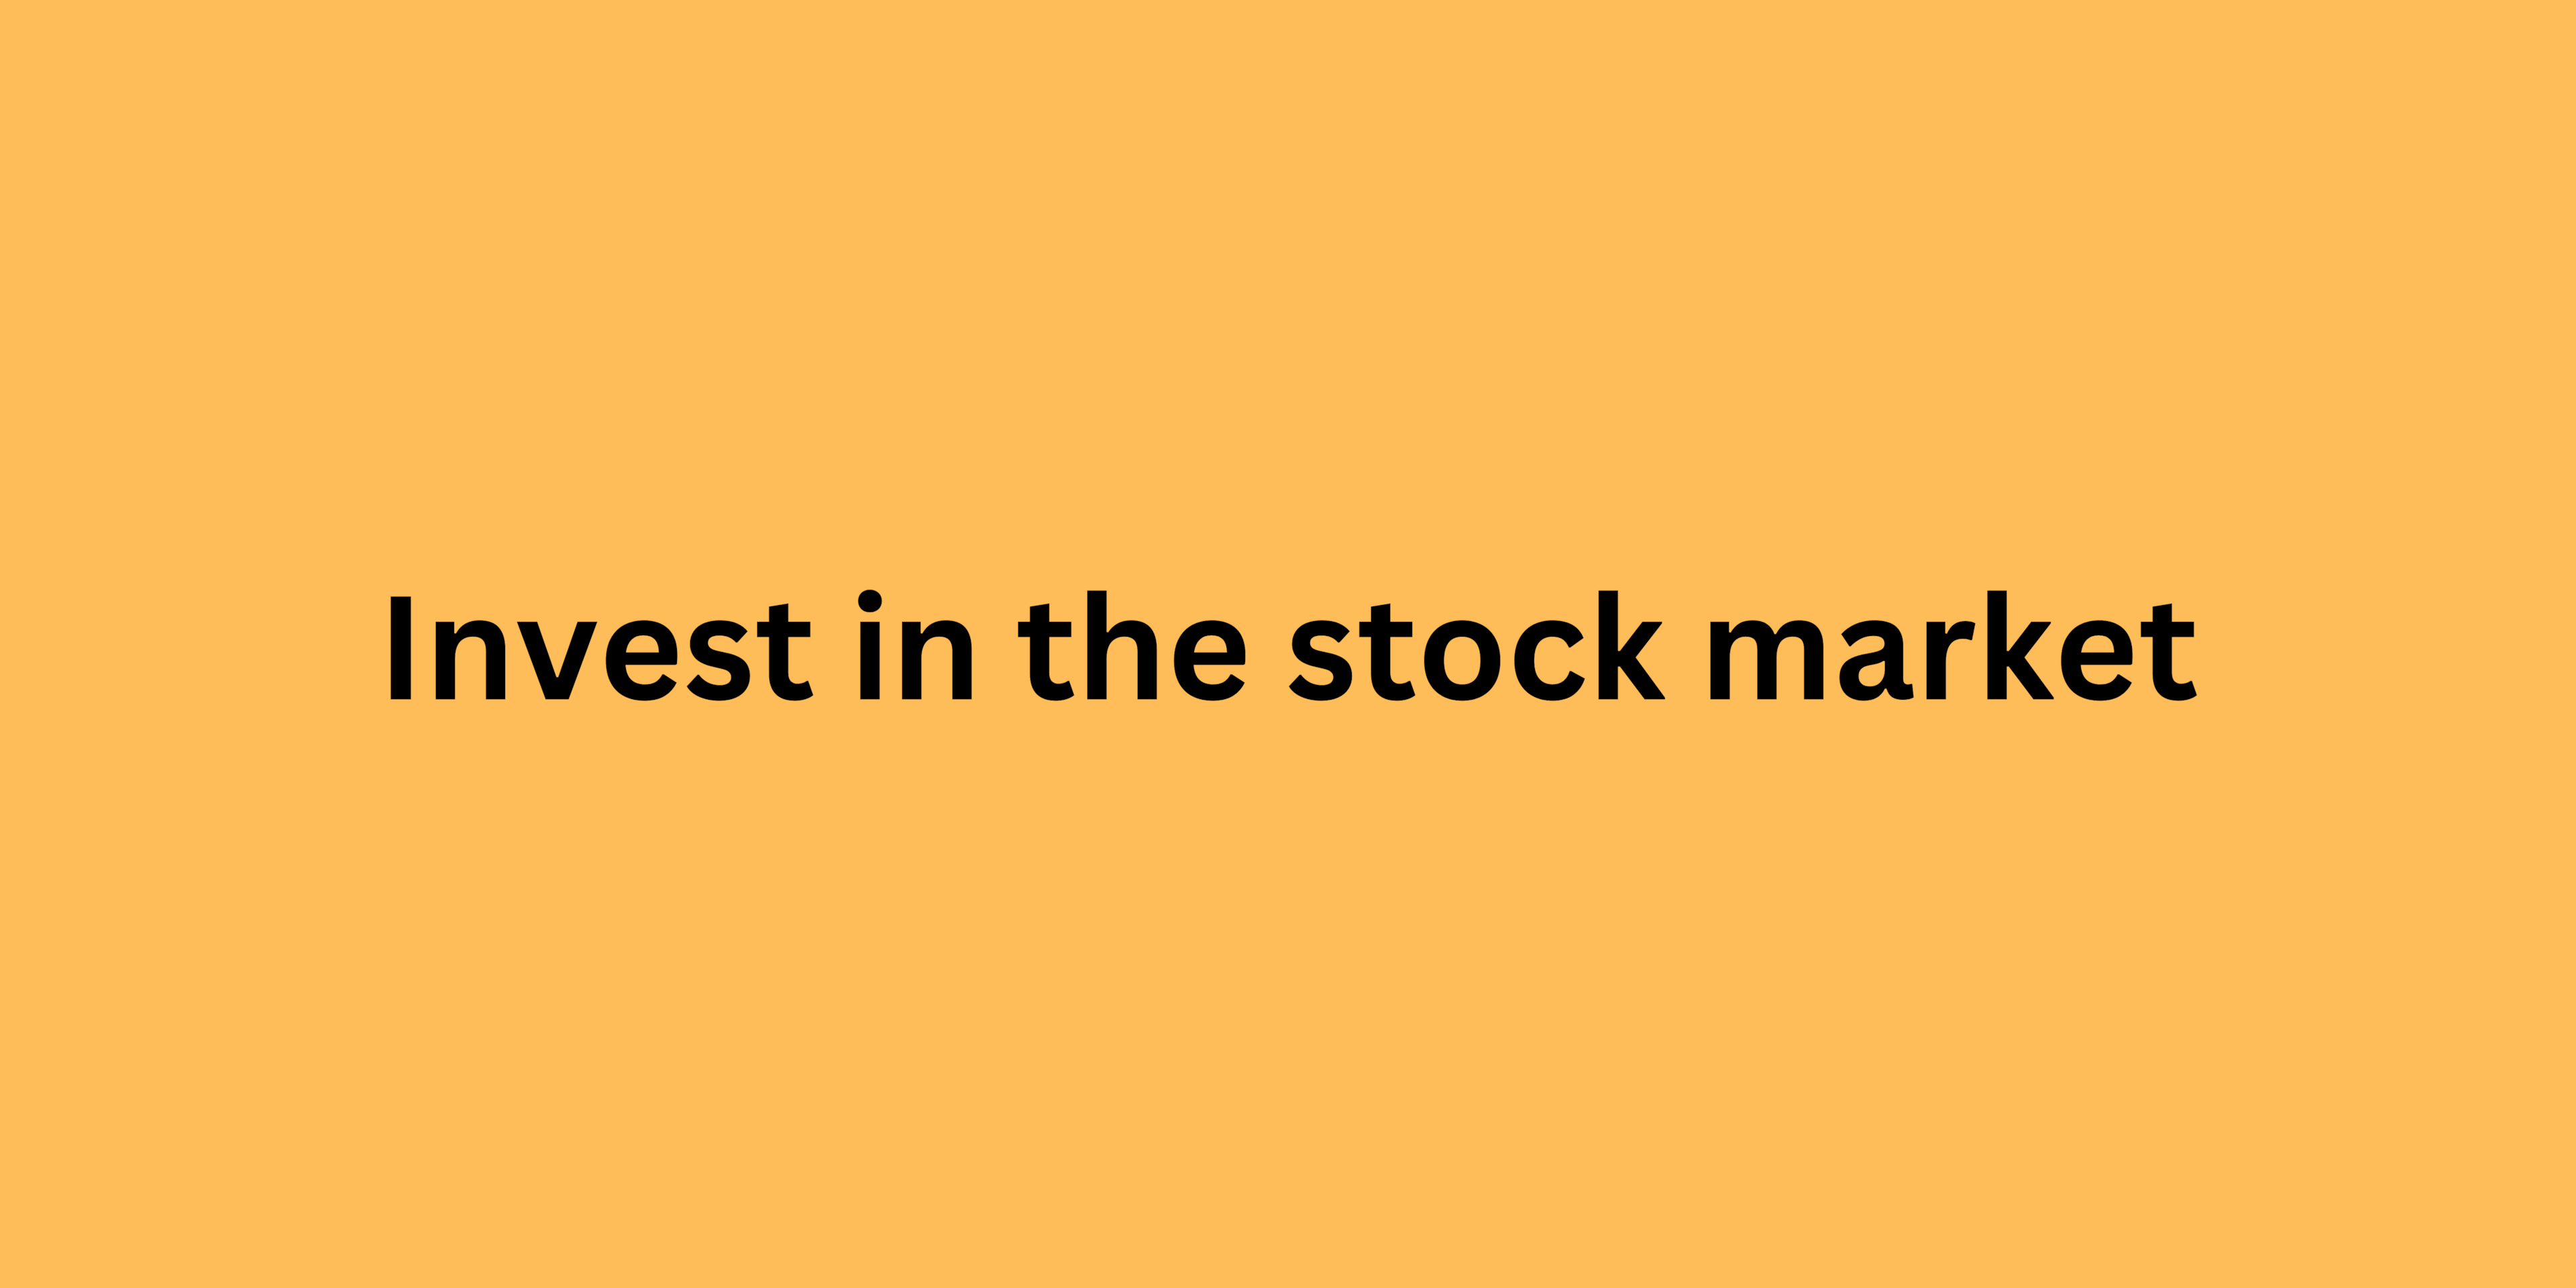 Invest in the stock market